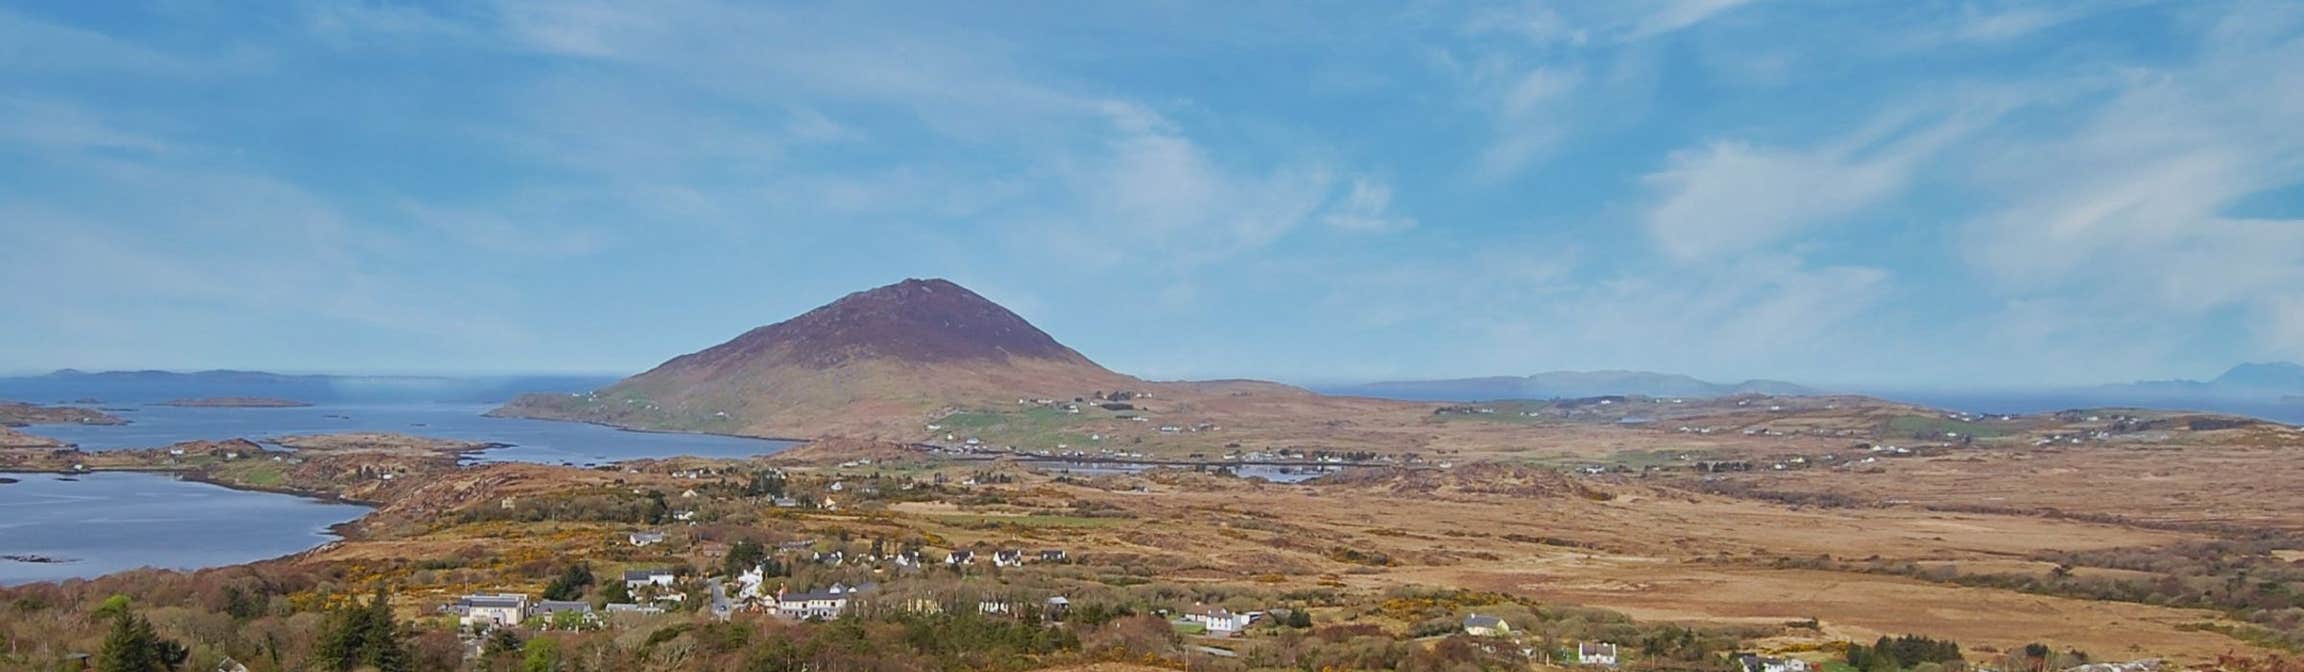 A scenic shot of Letterfrack in County Galway